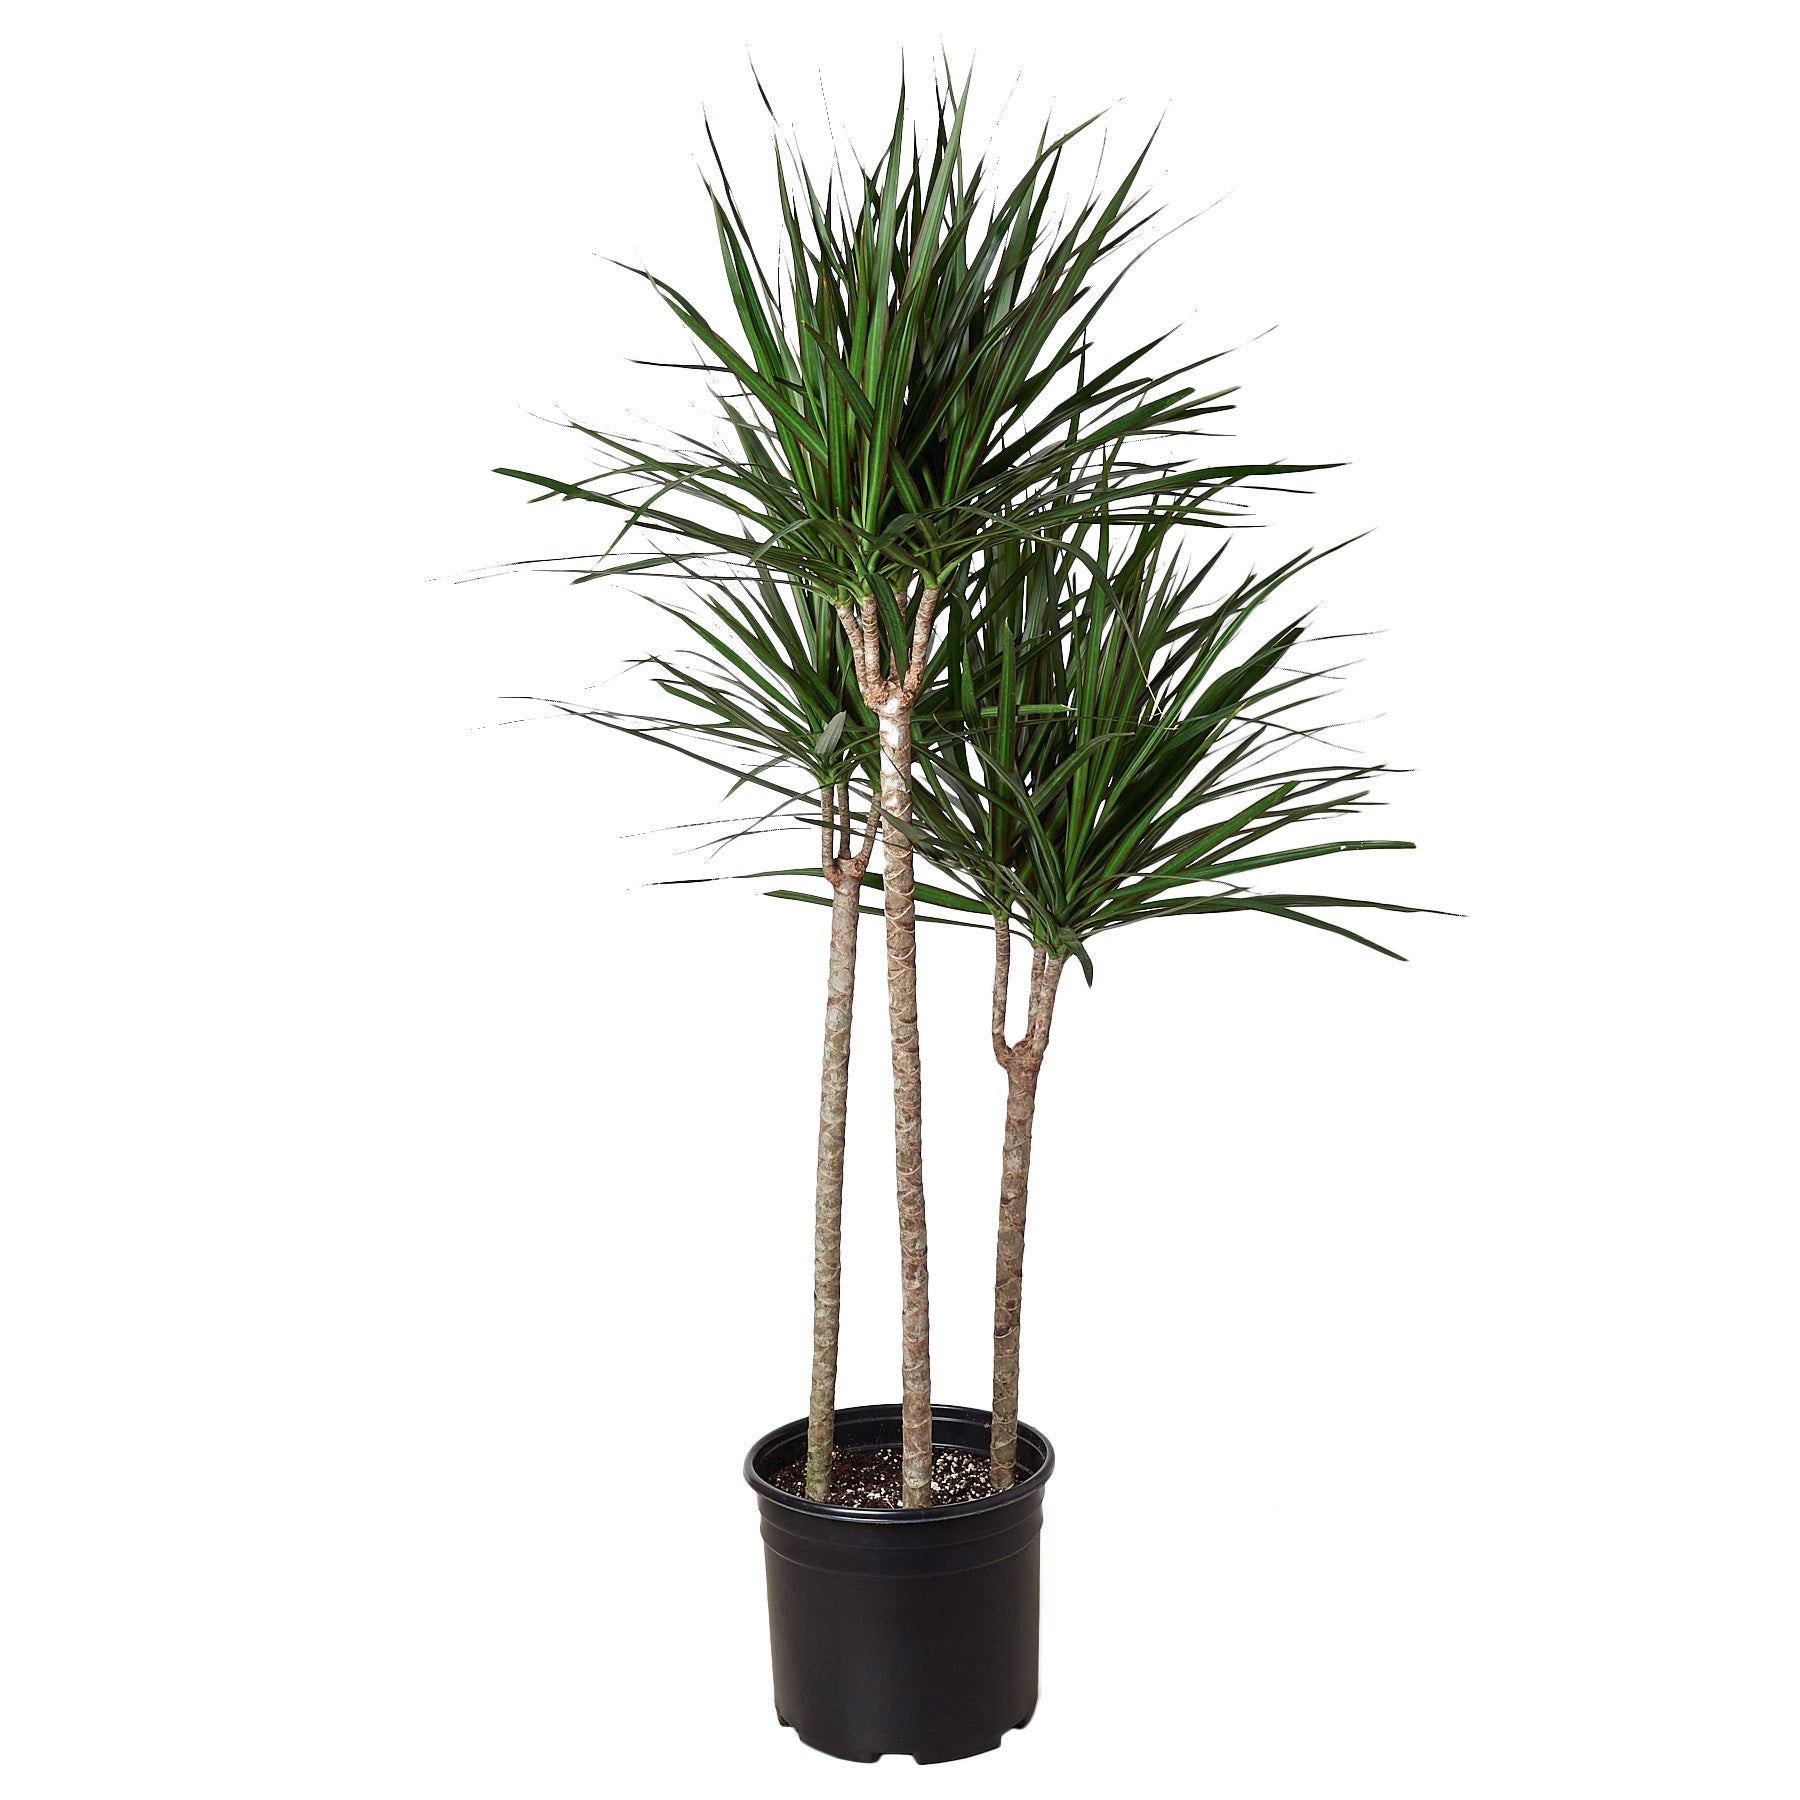 A palm tree in a black pot against a white background, available at the top garden centers near me.